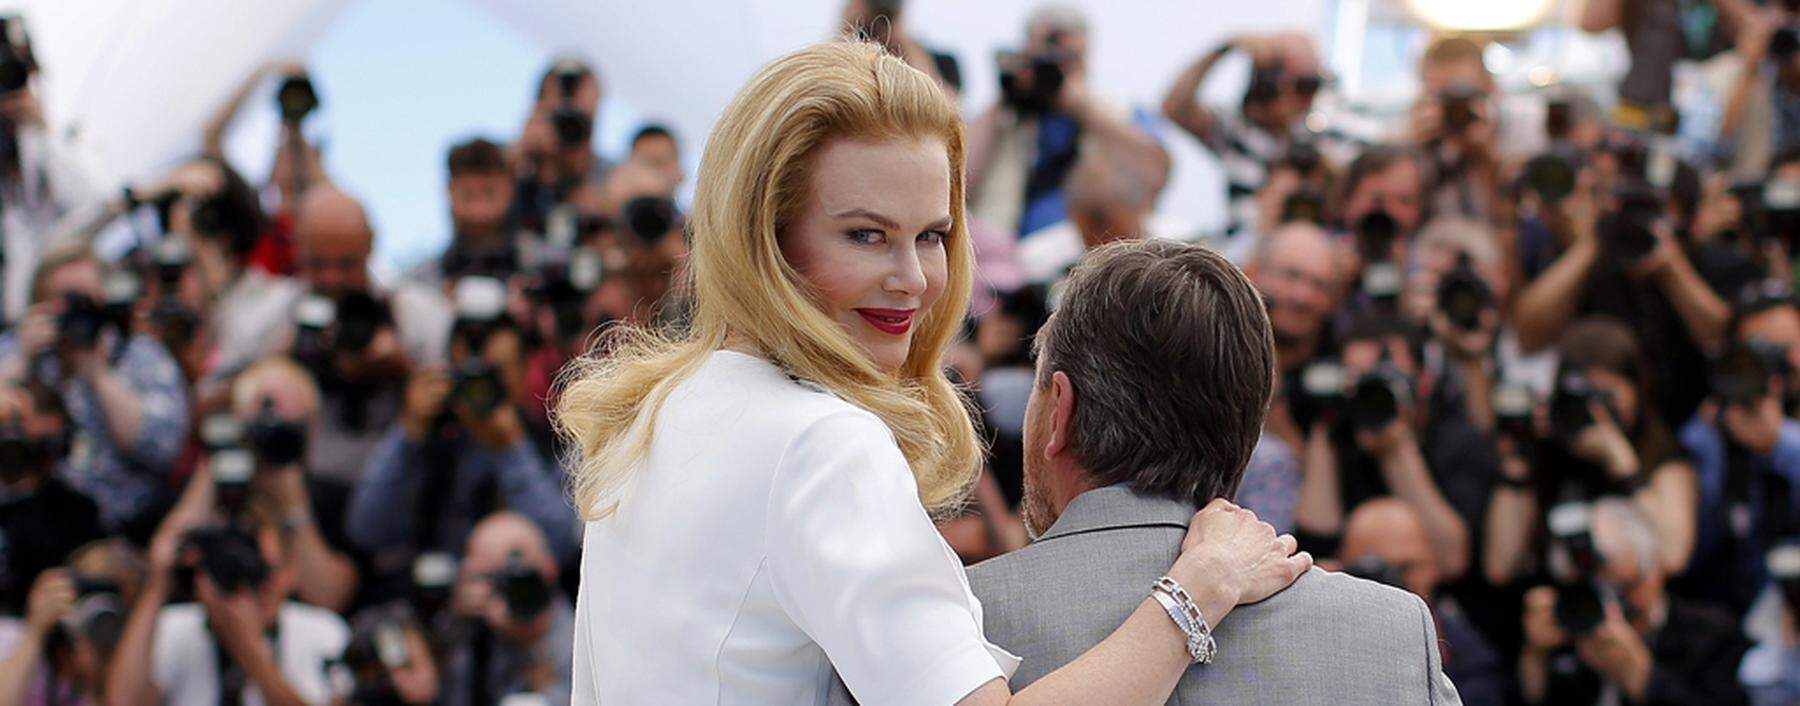 Cast members Nicole Kidman and Tim Roth pose during a photocall for the film ´Grace of Monaco´ out of competition before the opening of the 67th Cannes Film Festival in Cannes